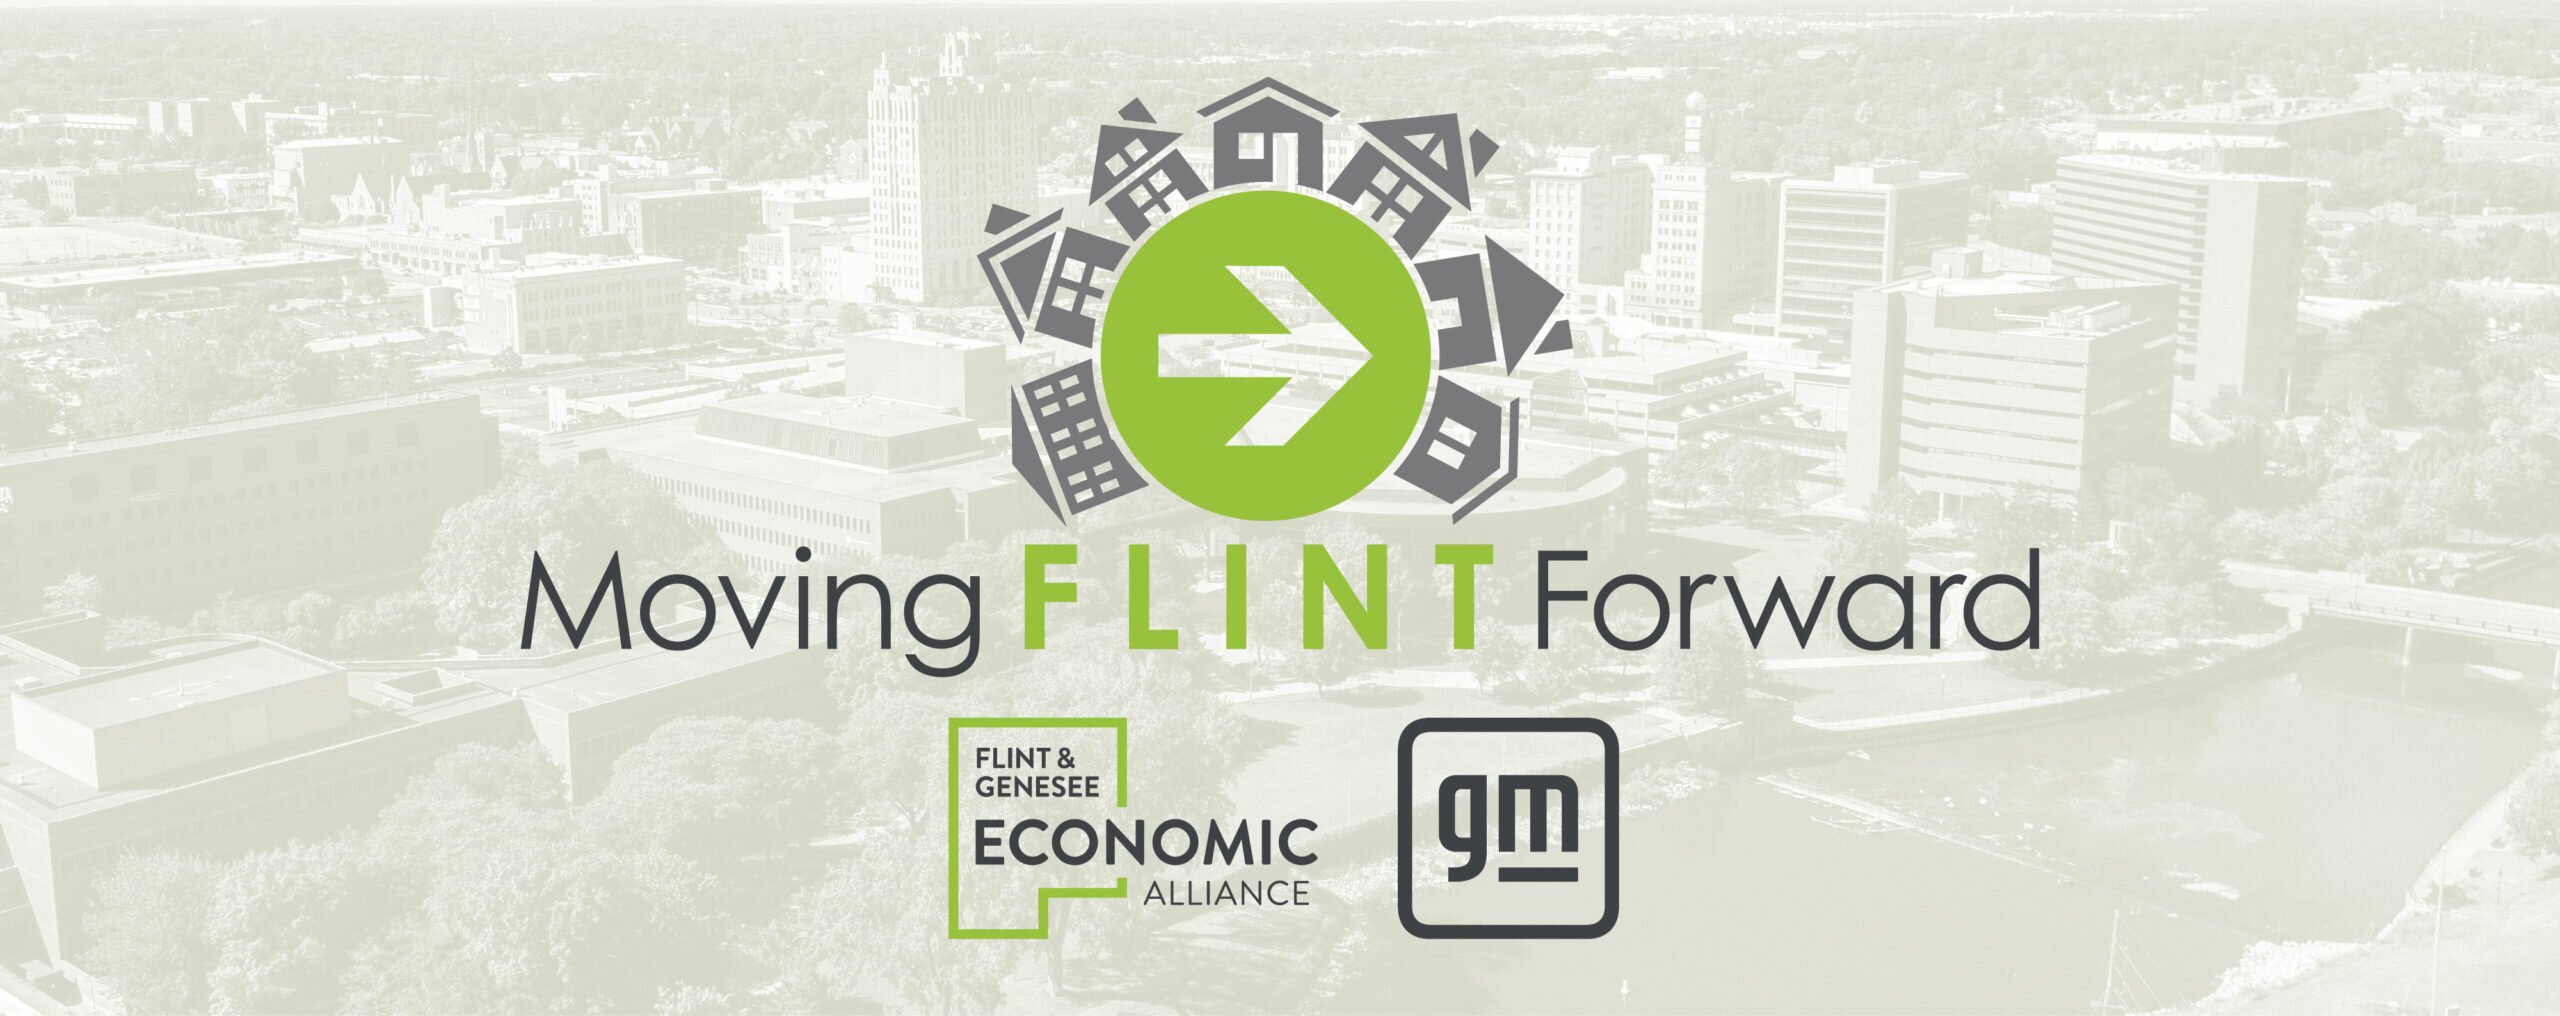 The deadline for the Moving Flint Forward Small Business Grant is March 18, 2022.